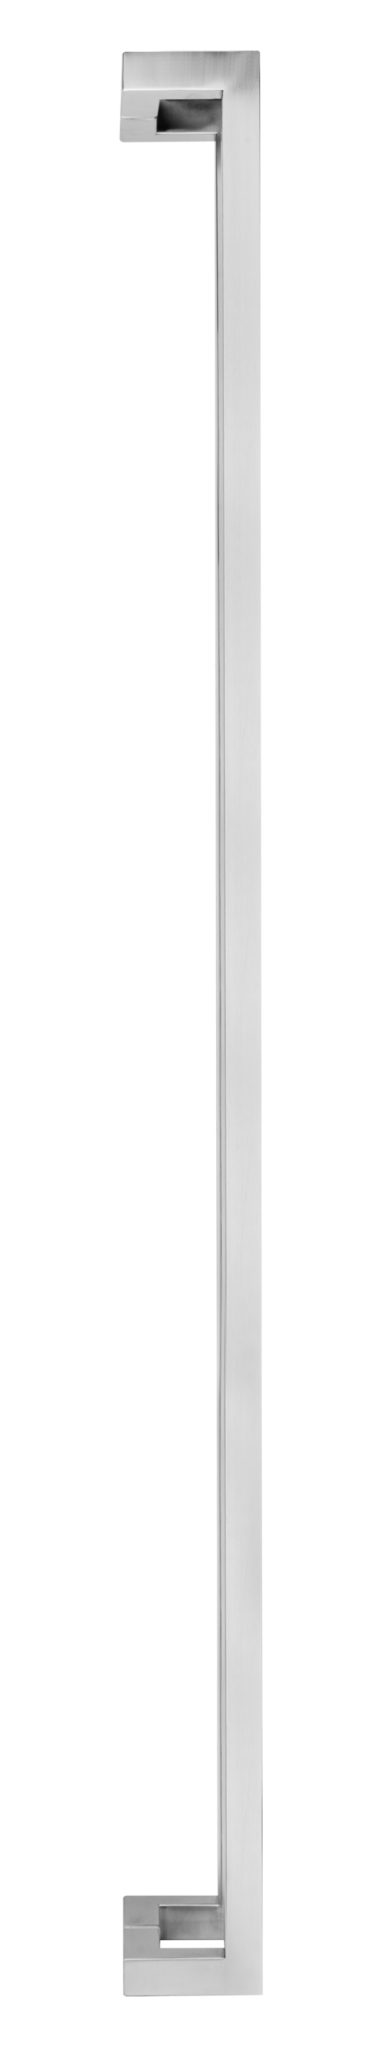 CSOP48BS Rockwell Commercial 48″ Square Offset Pull in Brushed Nickel finish fits both Heavy Glass doors and 1-3/4 inch to 2-1/4 inch Thick doors.